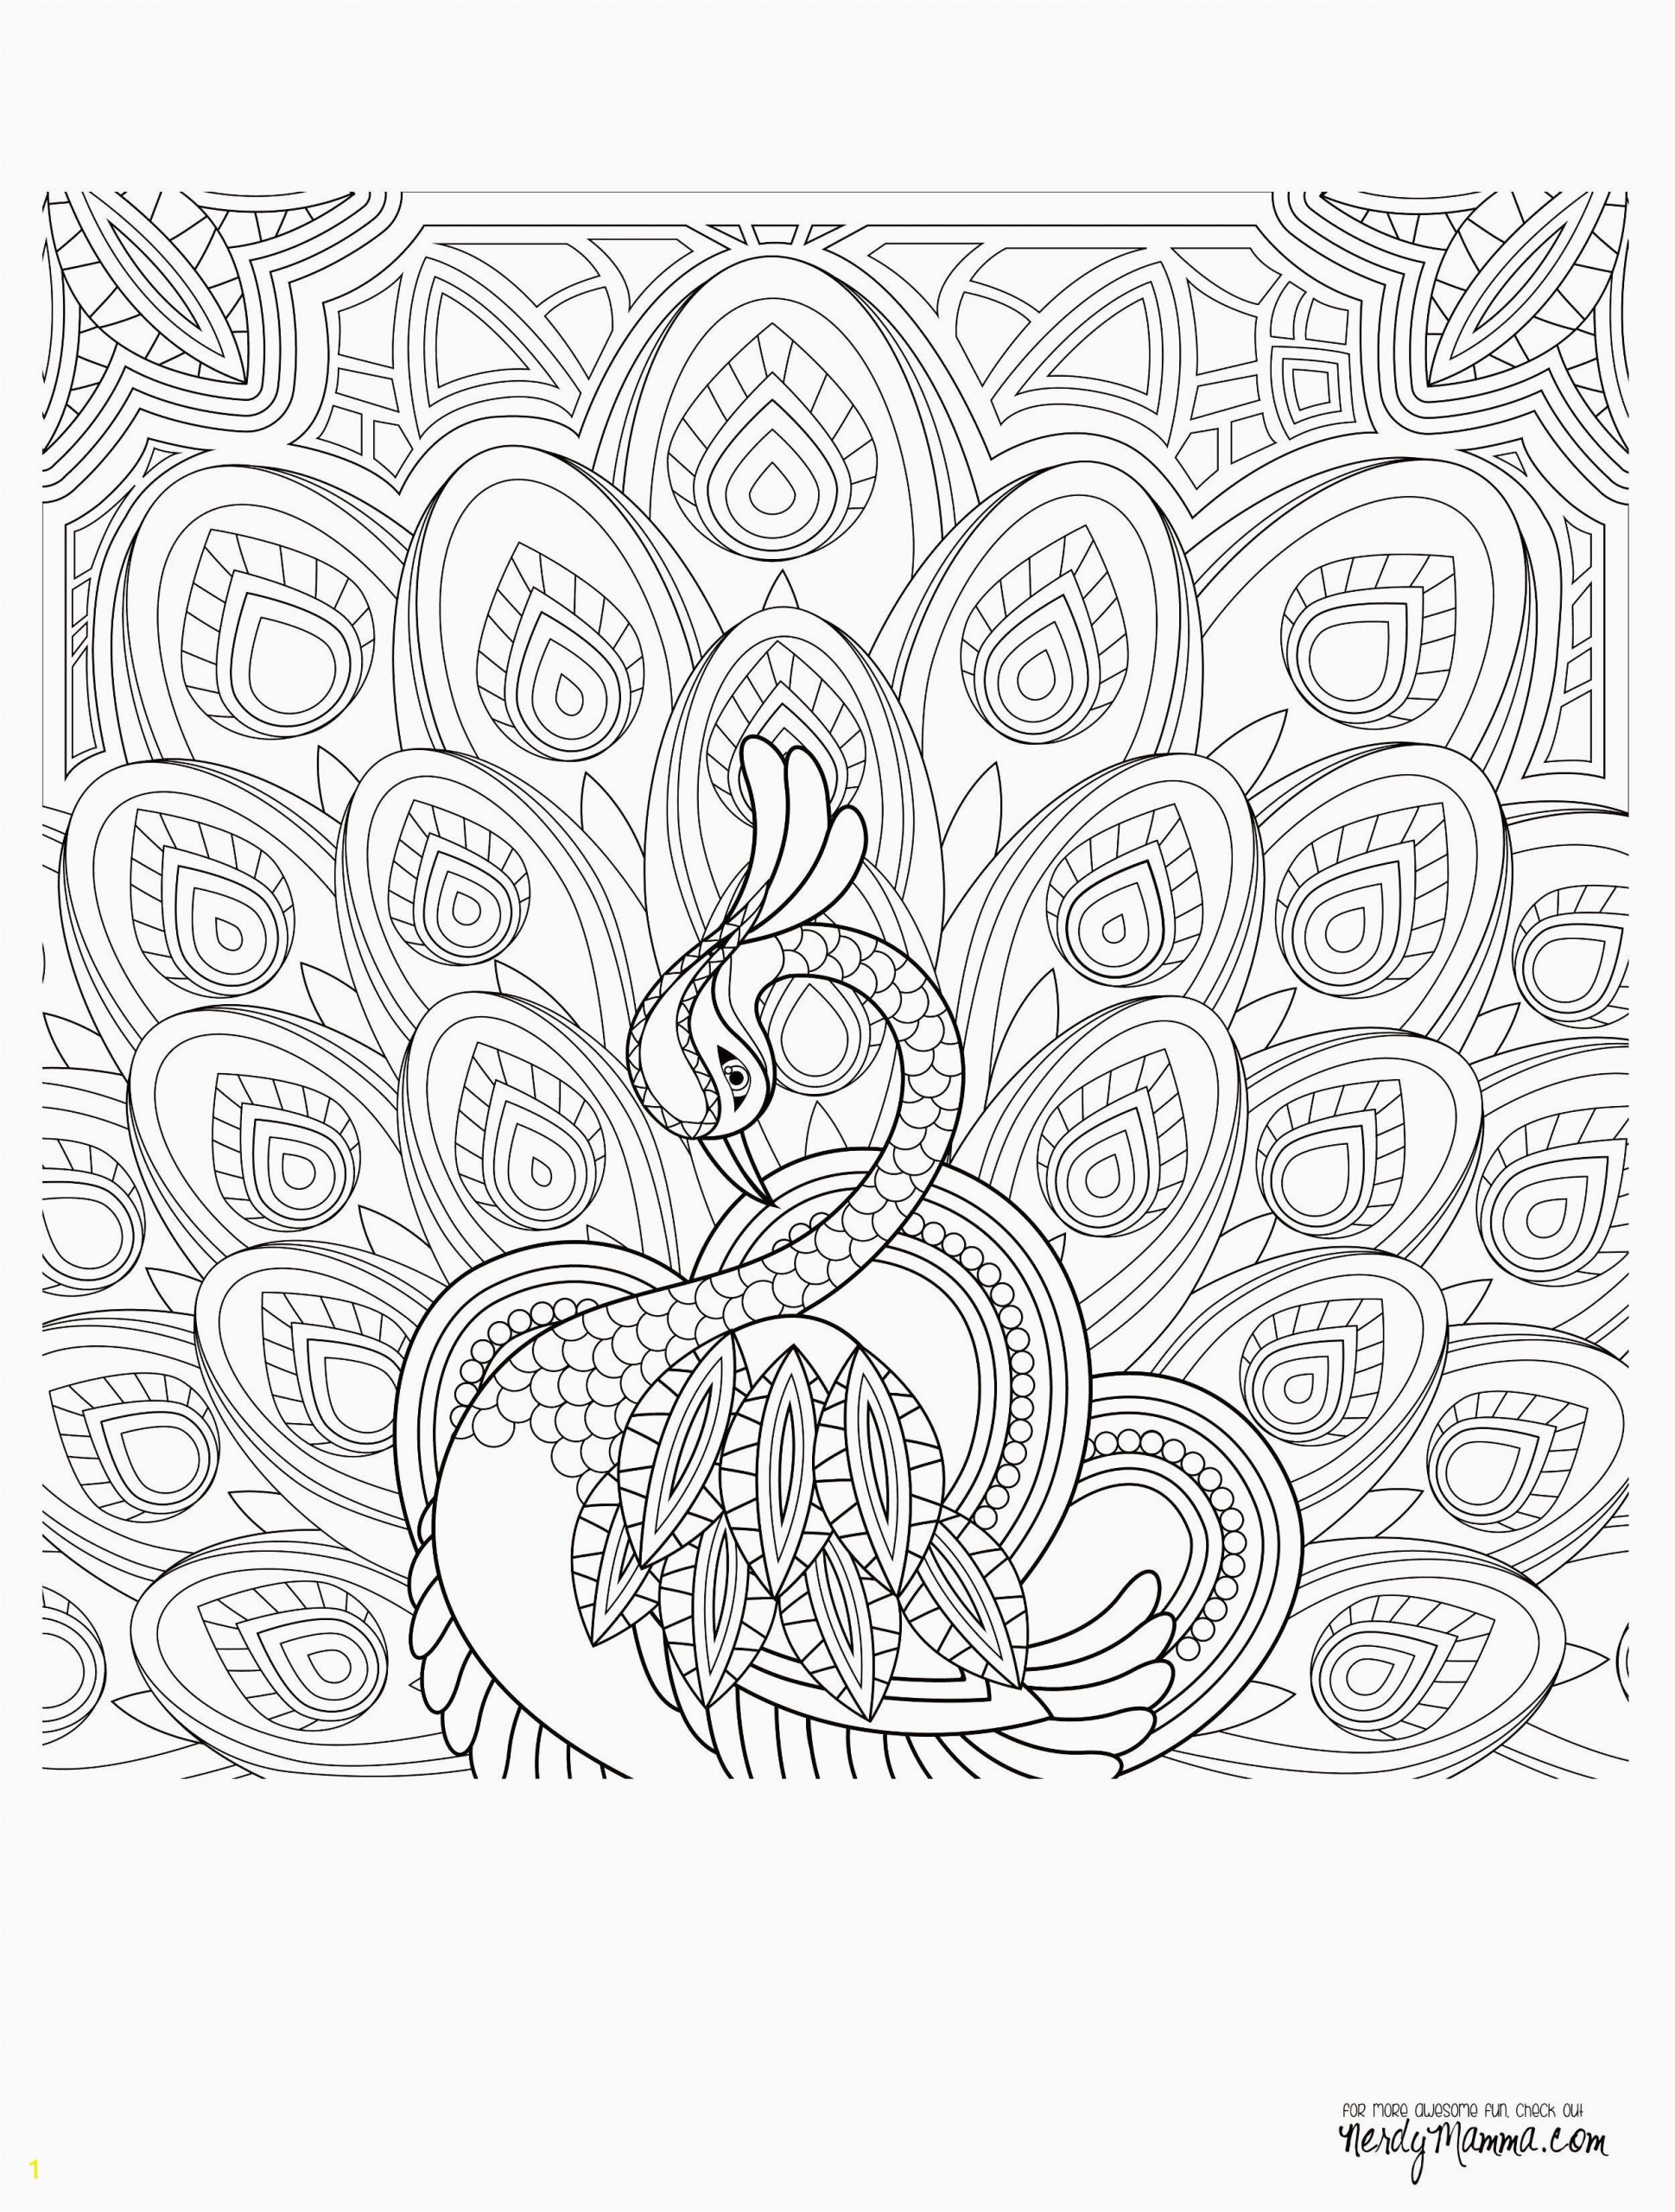 Alphabet Coloring Pages for Adults Alphabet Coloring Pages A